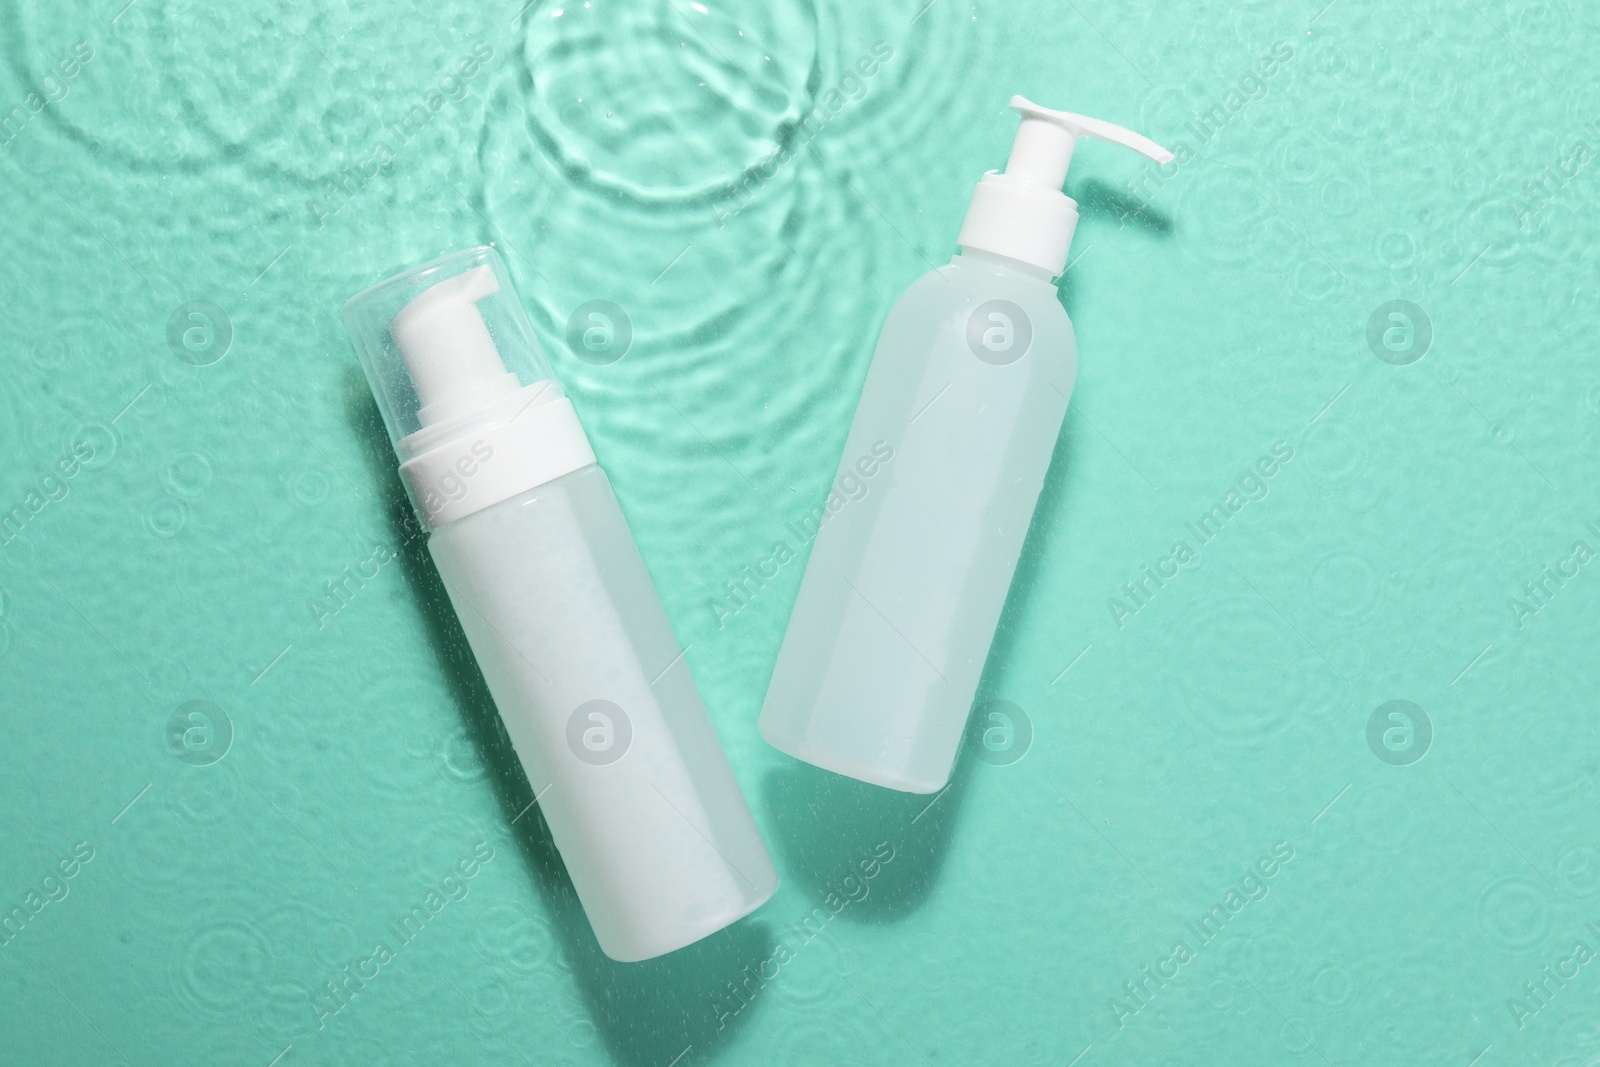 Photo of Bottles of face cleansing product on water against turquoise background, flat lay